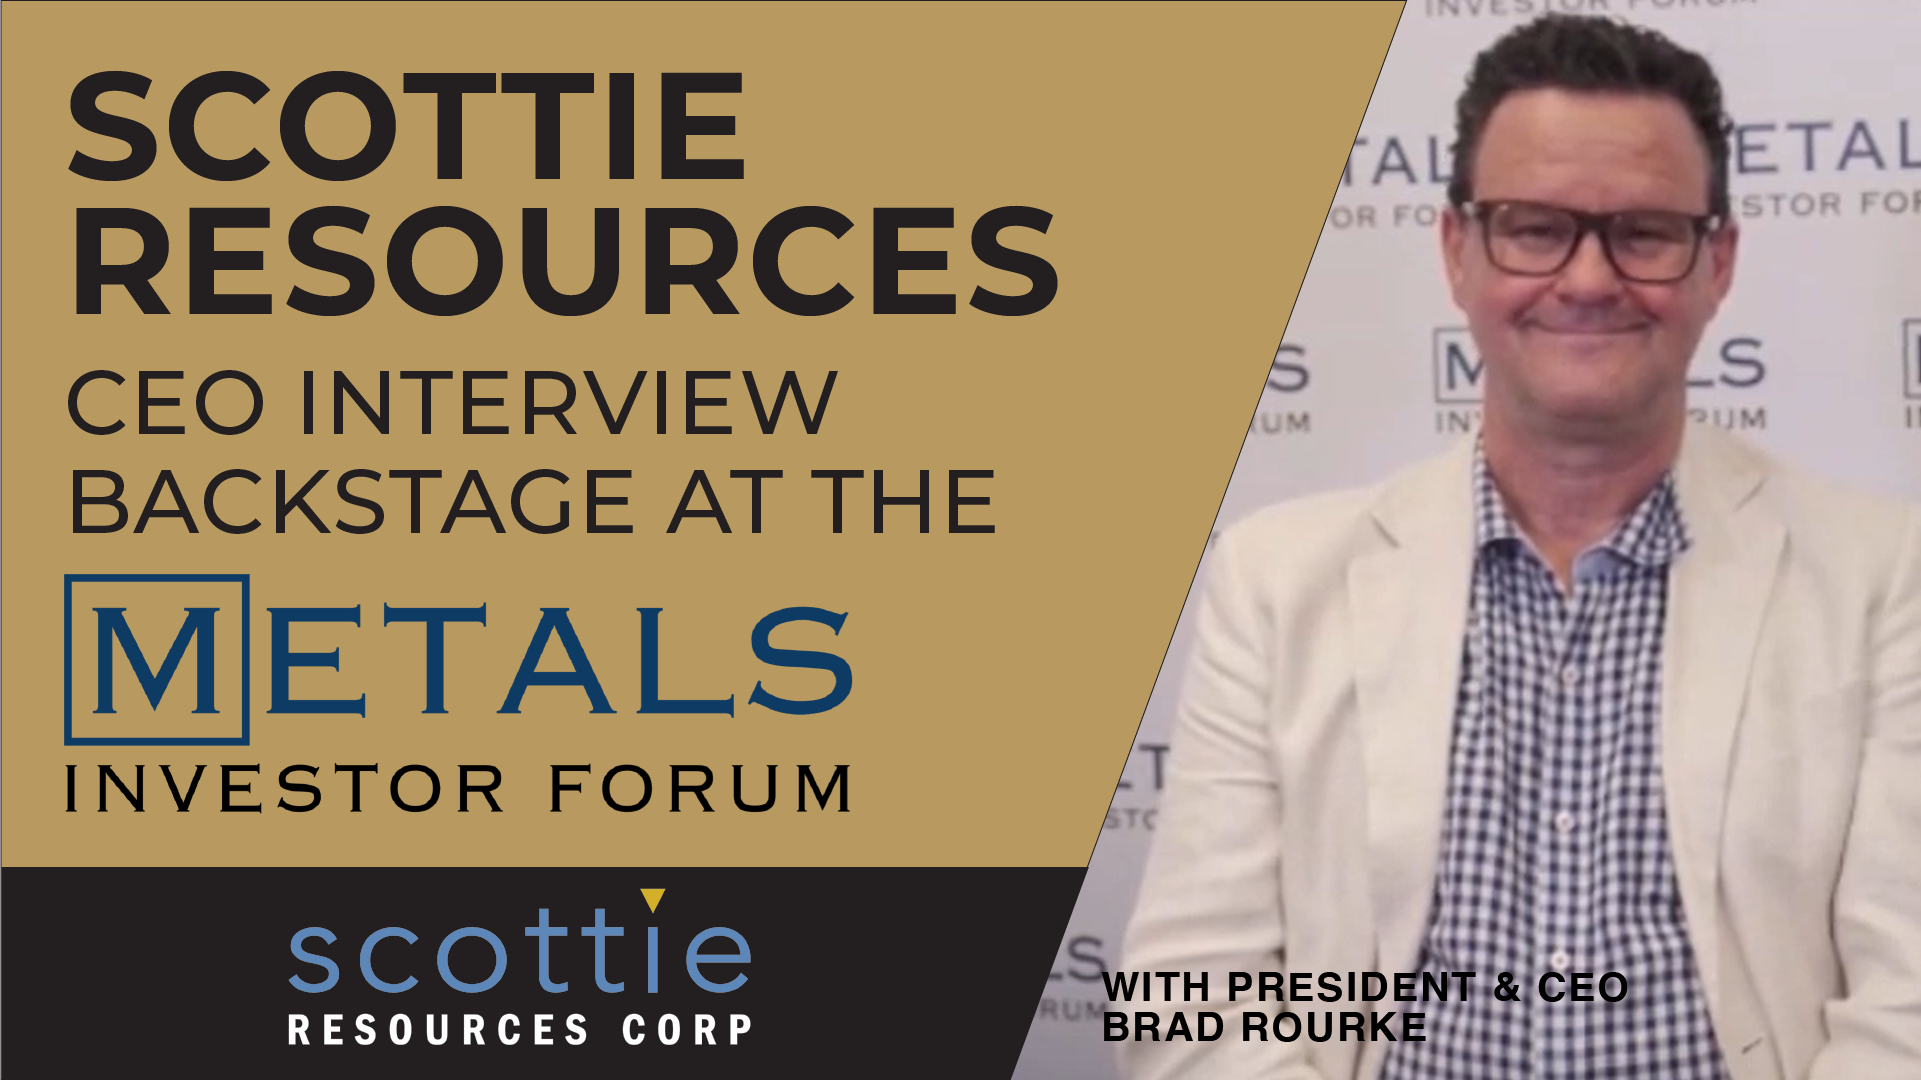 Backstage Interview with President and CEO Brad Rourke at the Metals Investor Forum, June 11-12, 2022